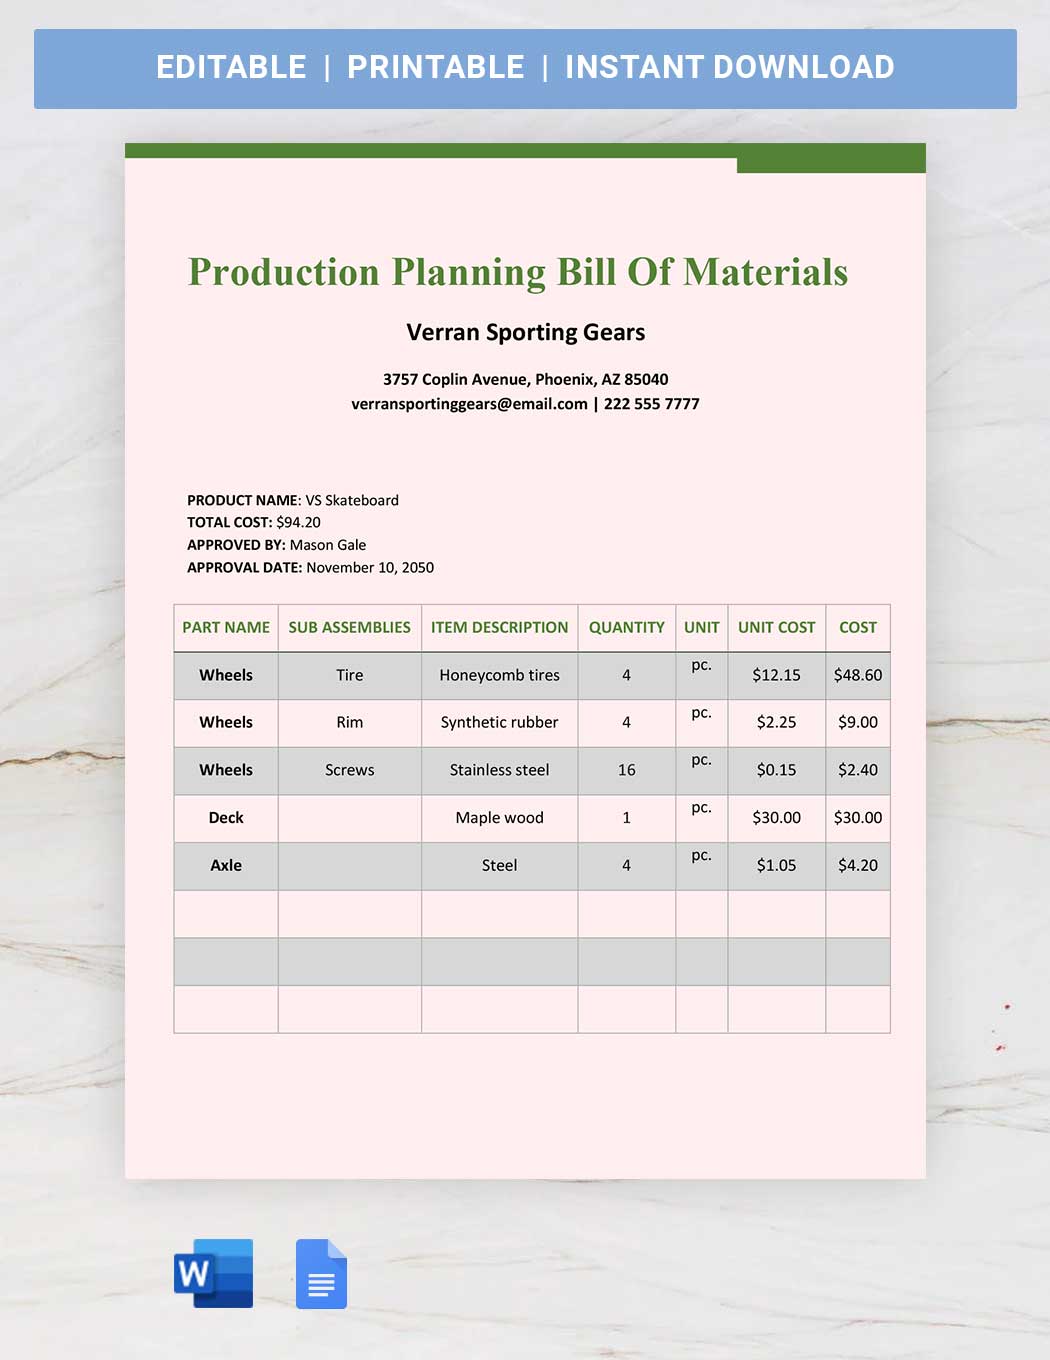 Production Planning Bill Of Materials in Word, Google Docs